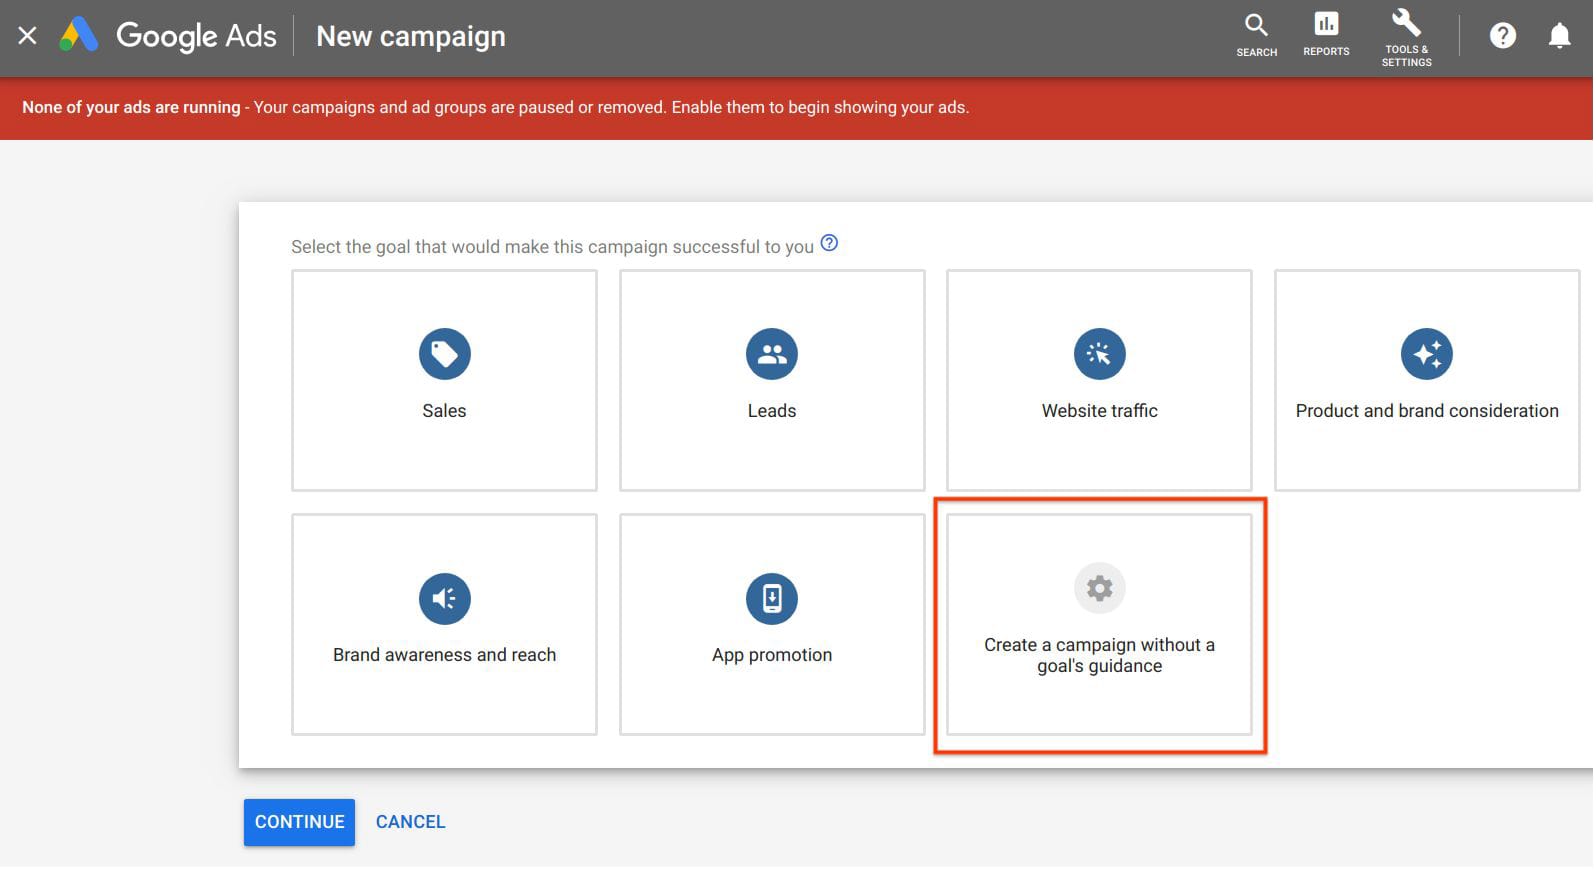 Create a campaign without a goal’s guidance